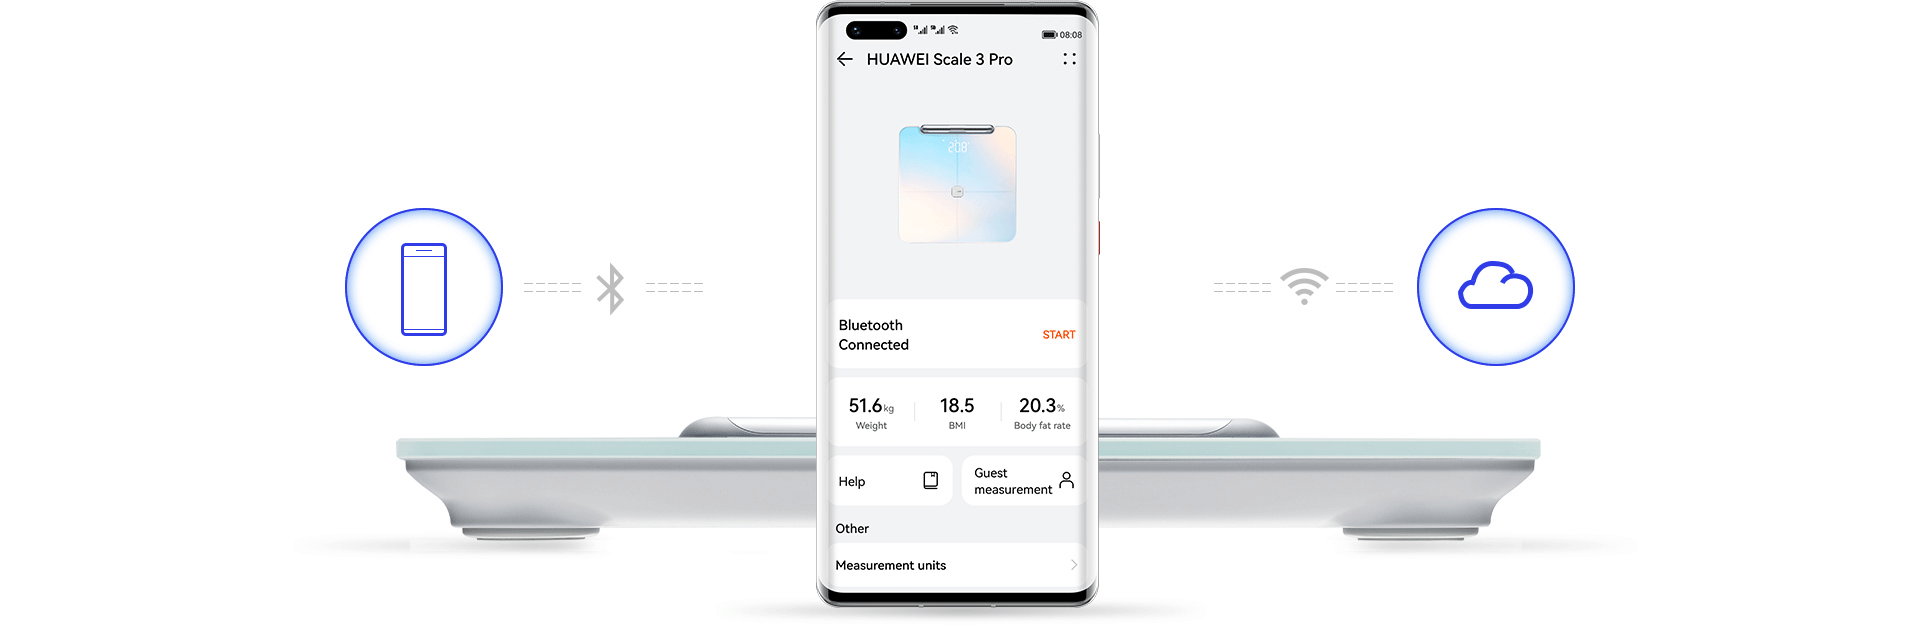 https://consumer.huawei.com/content/dam/huawei-cbg-site/common/mkt/pdp/accessories/scale-3-pro/imgs/huawei-scale-3-pro-connection.png